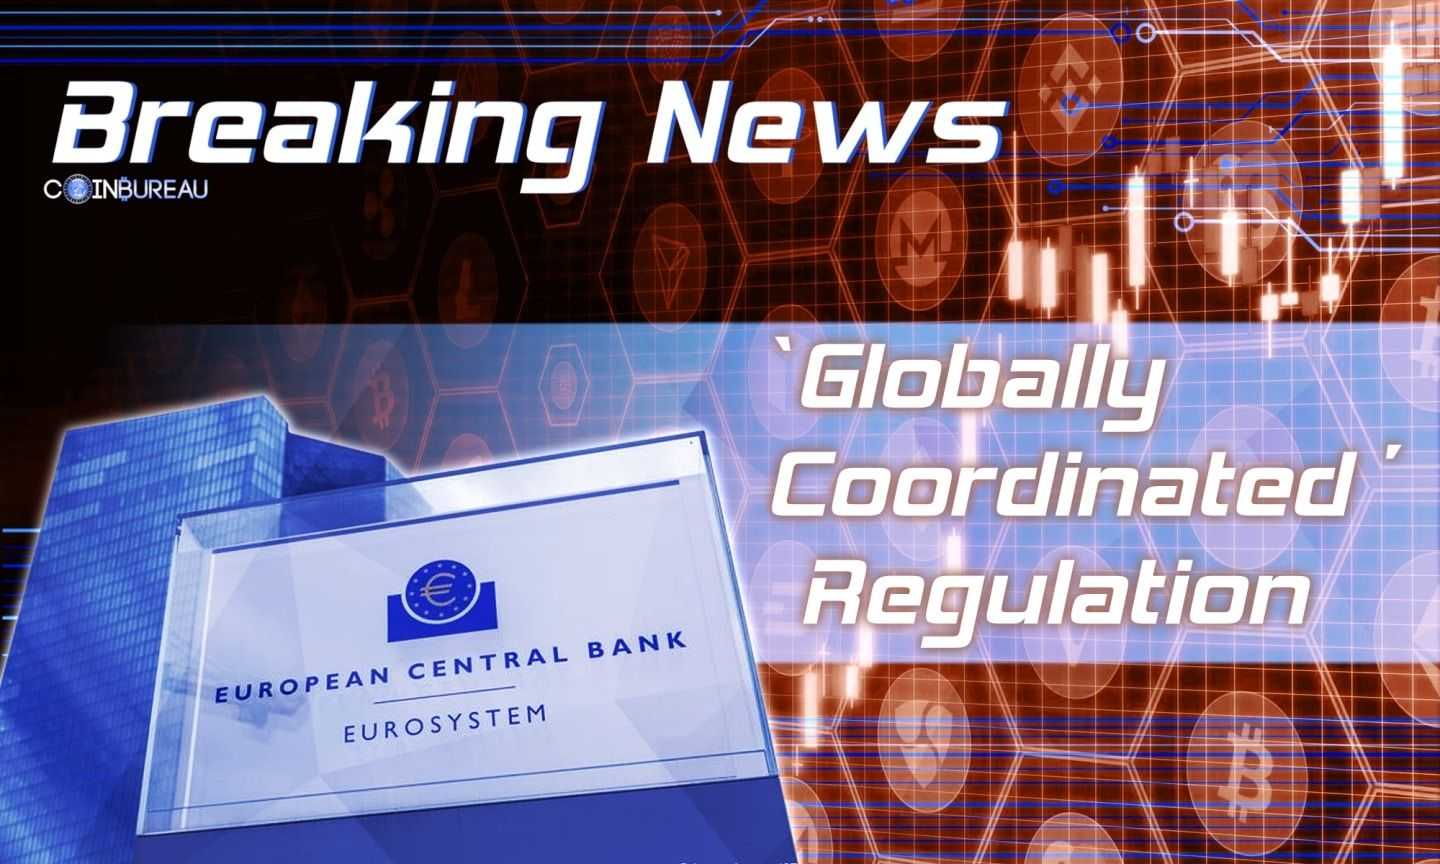 European Central Bank Calls for ‘Globally Coordinated’ Regulation on Cryptocurrency